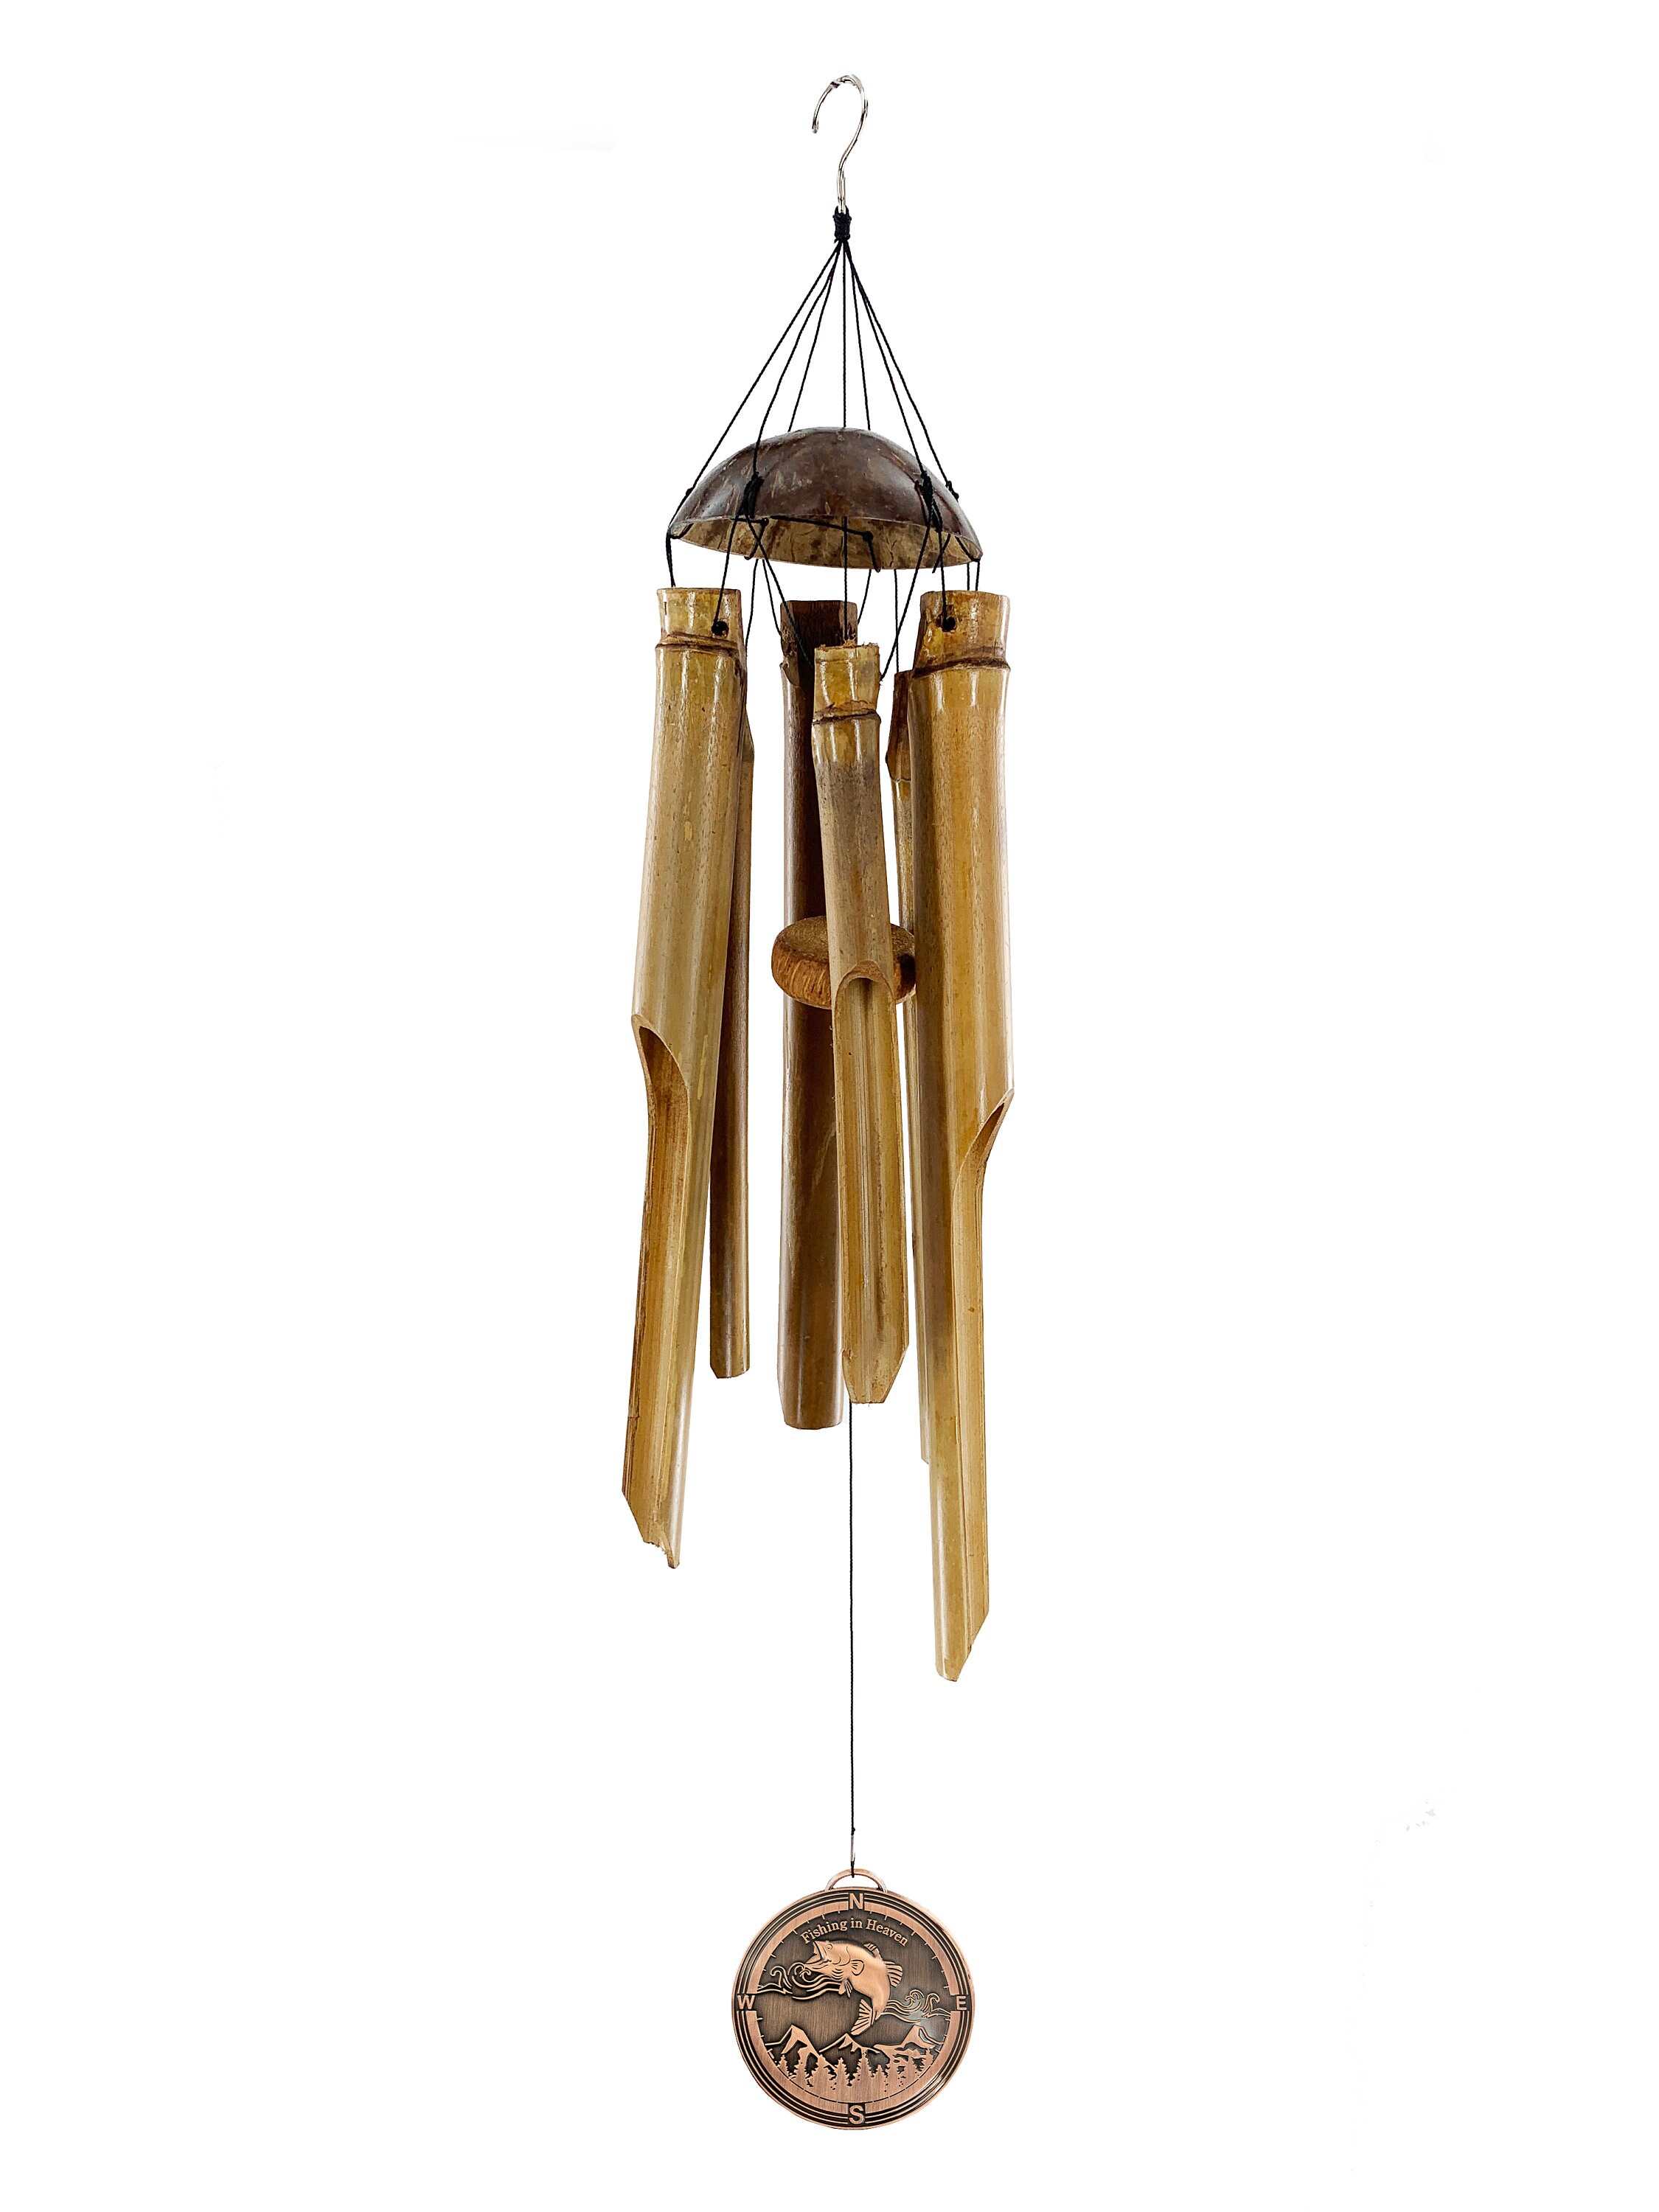 Fishing in Heaven Memorial Gift in Sympathy Personalized Gifts Fir the  Death of a Fisherman Bamboo Wind Chime Gifts by Weathered Raindrop 